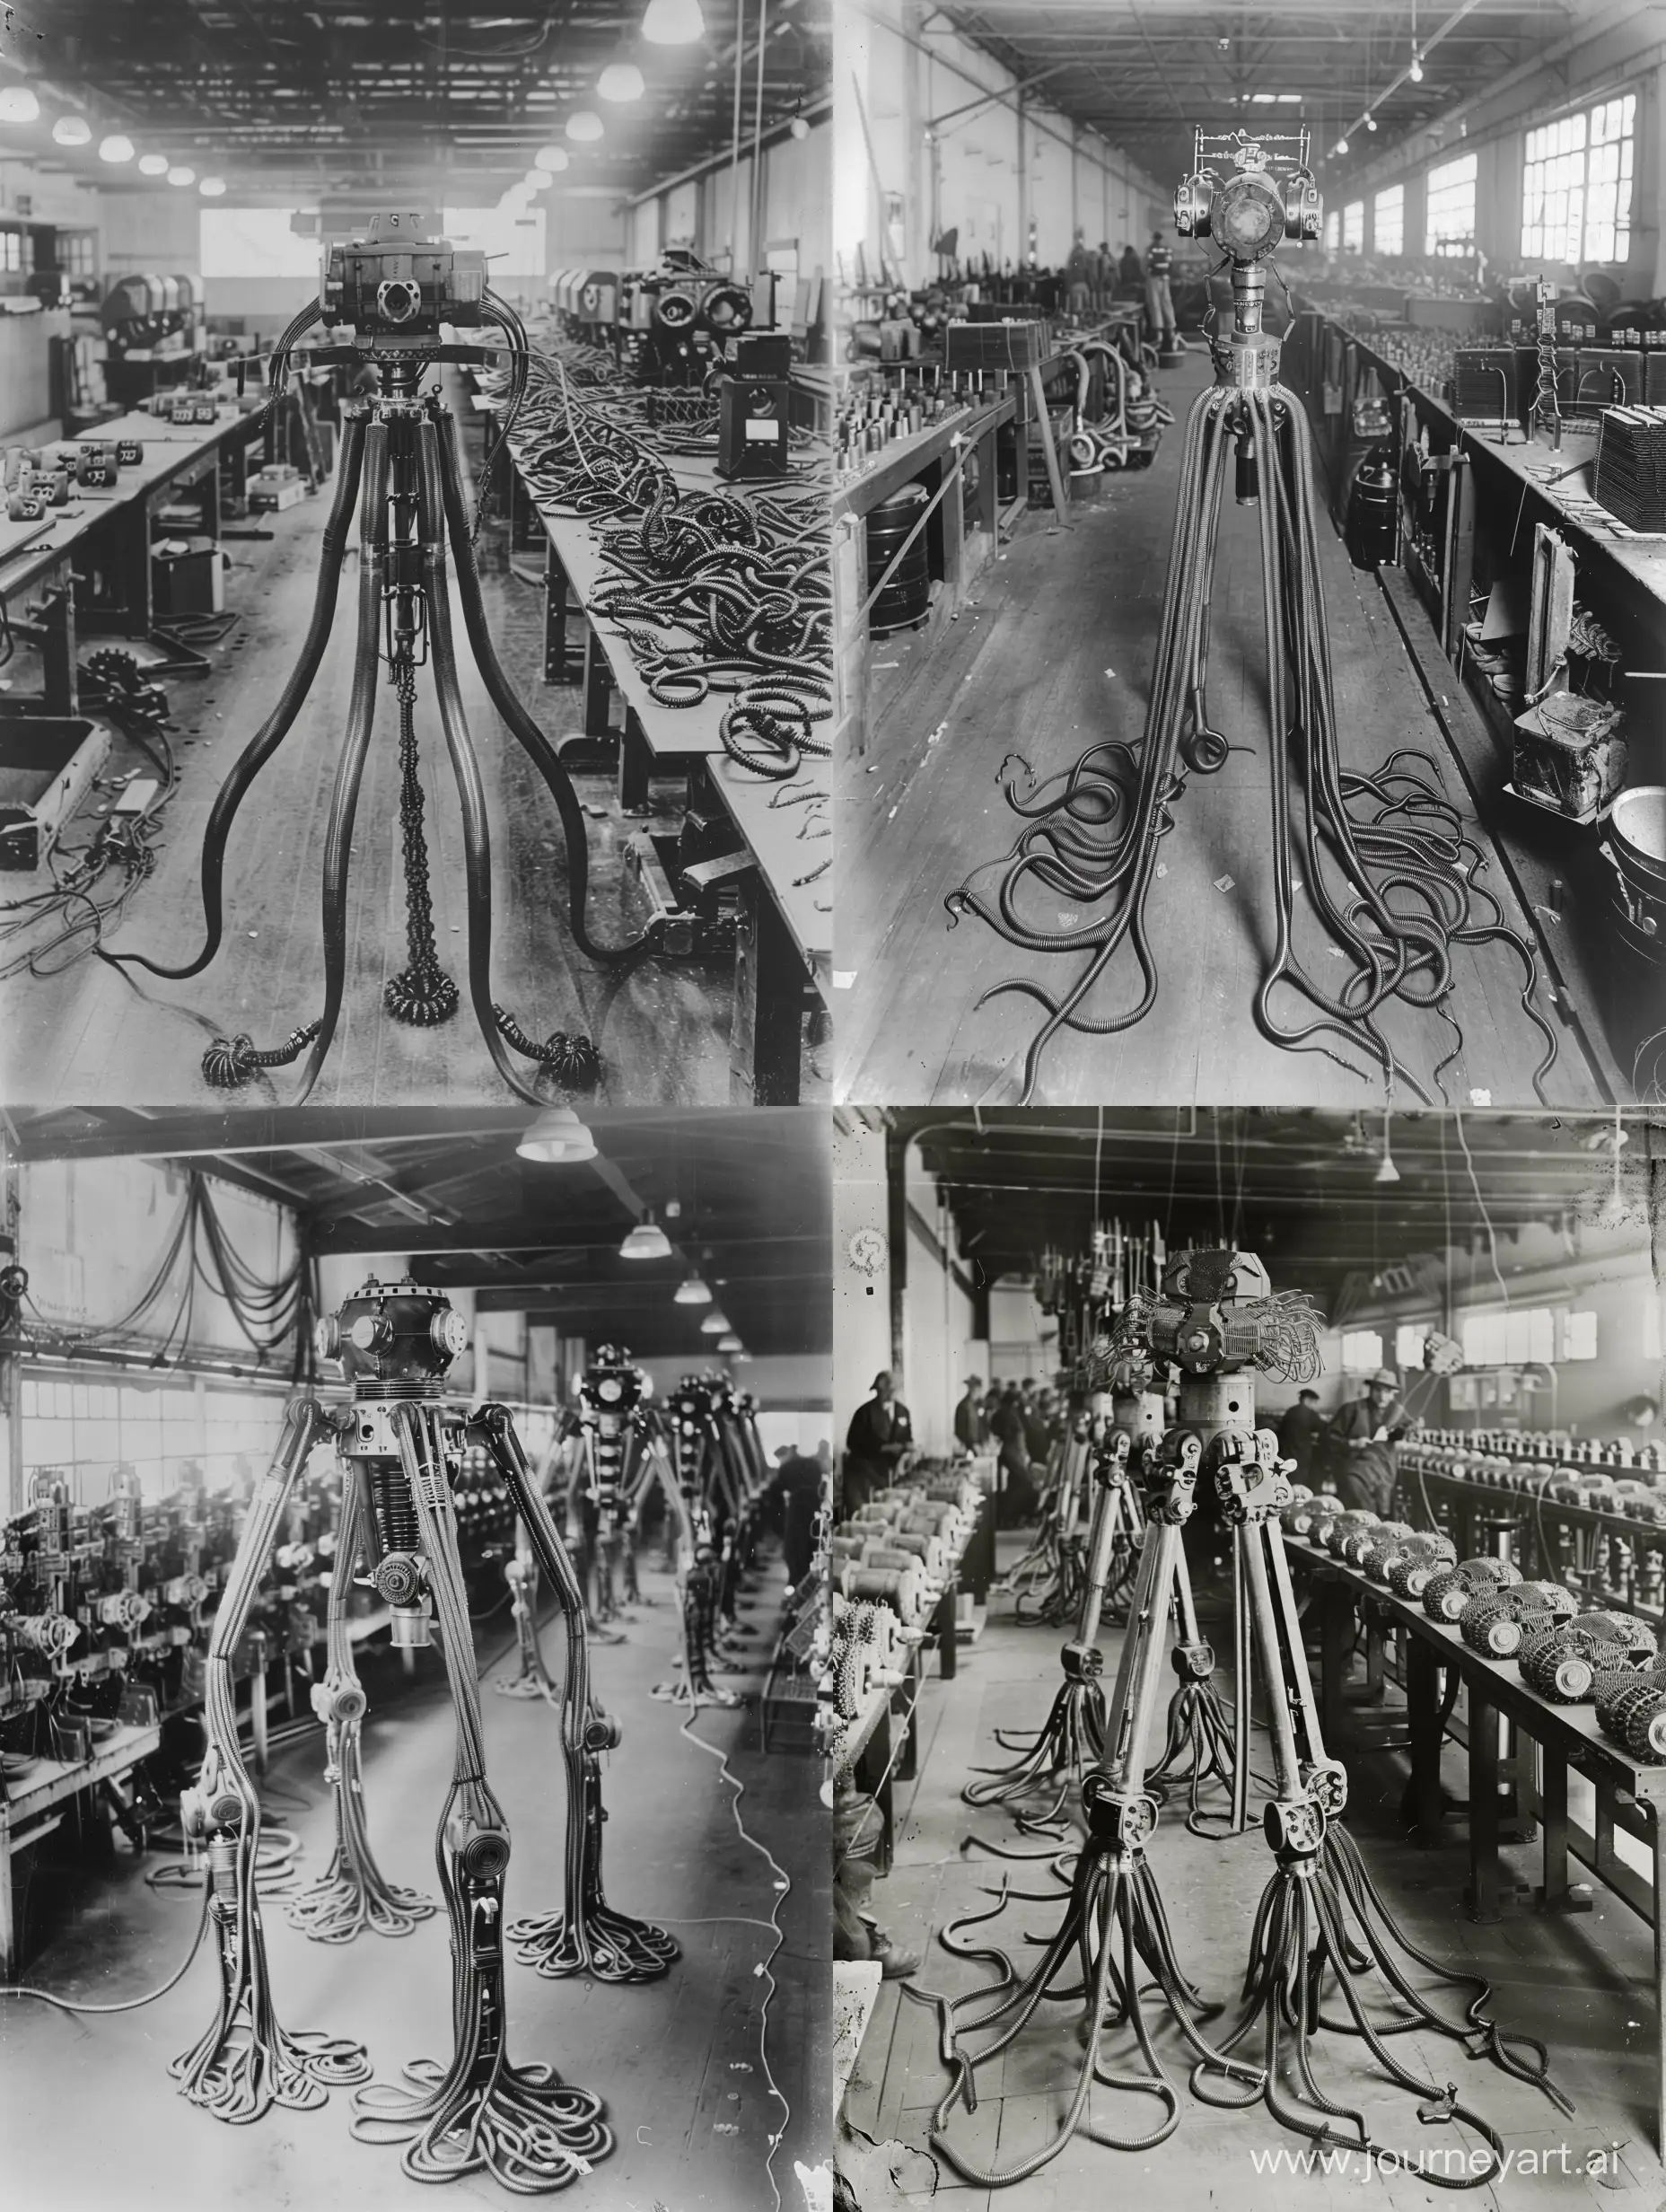 Vintage-Factory-Assembly-Line-1933-Mech-Construction-with-TentacleLike-Wires